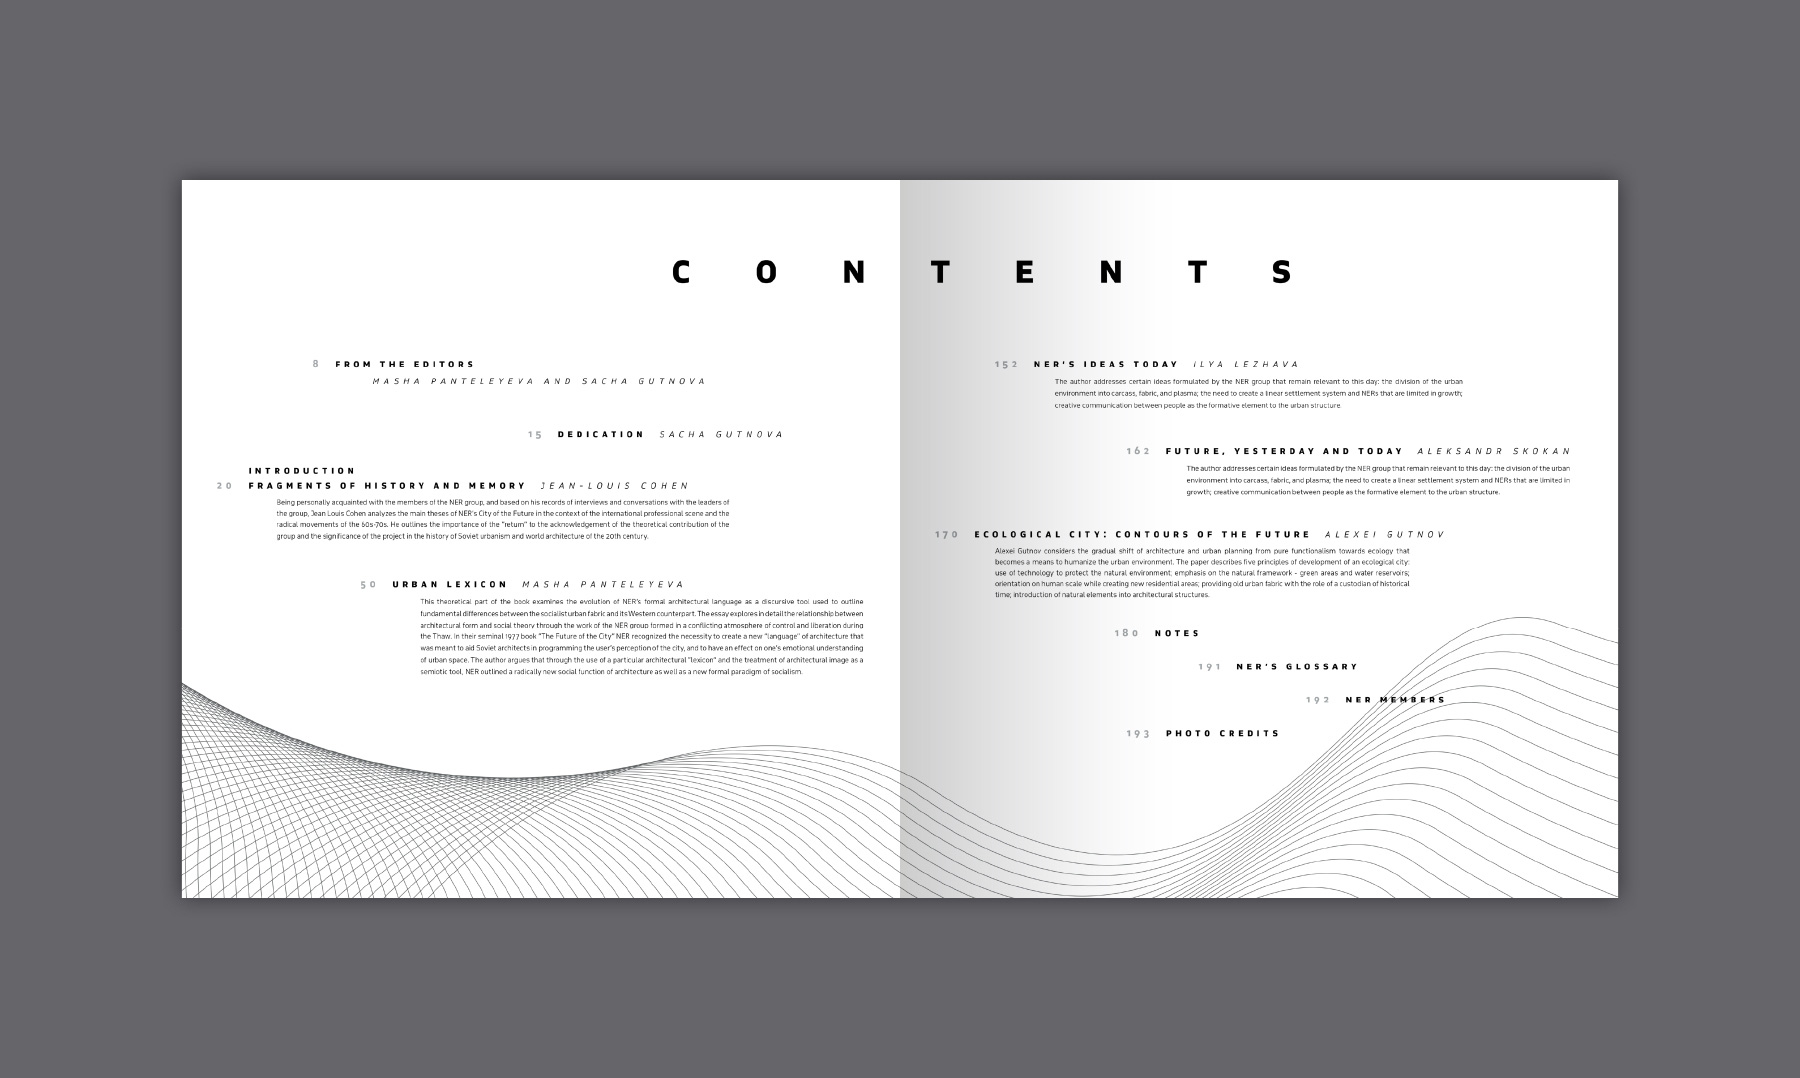 City of the Future book content's page with non-aligned blocks of typography and a pattern of organic silver lines at the bottom